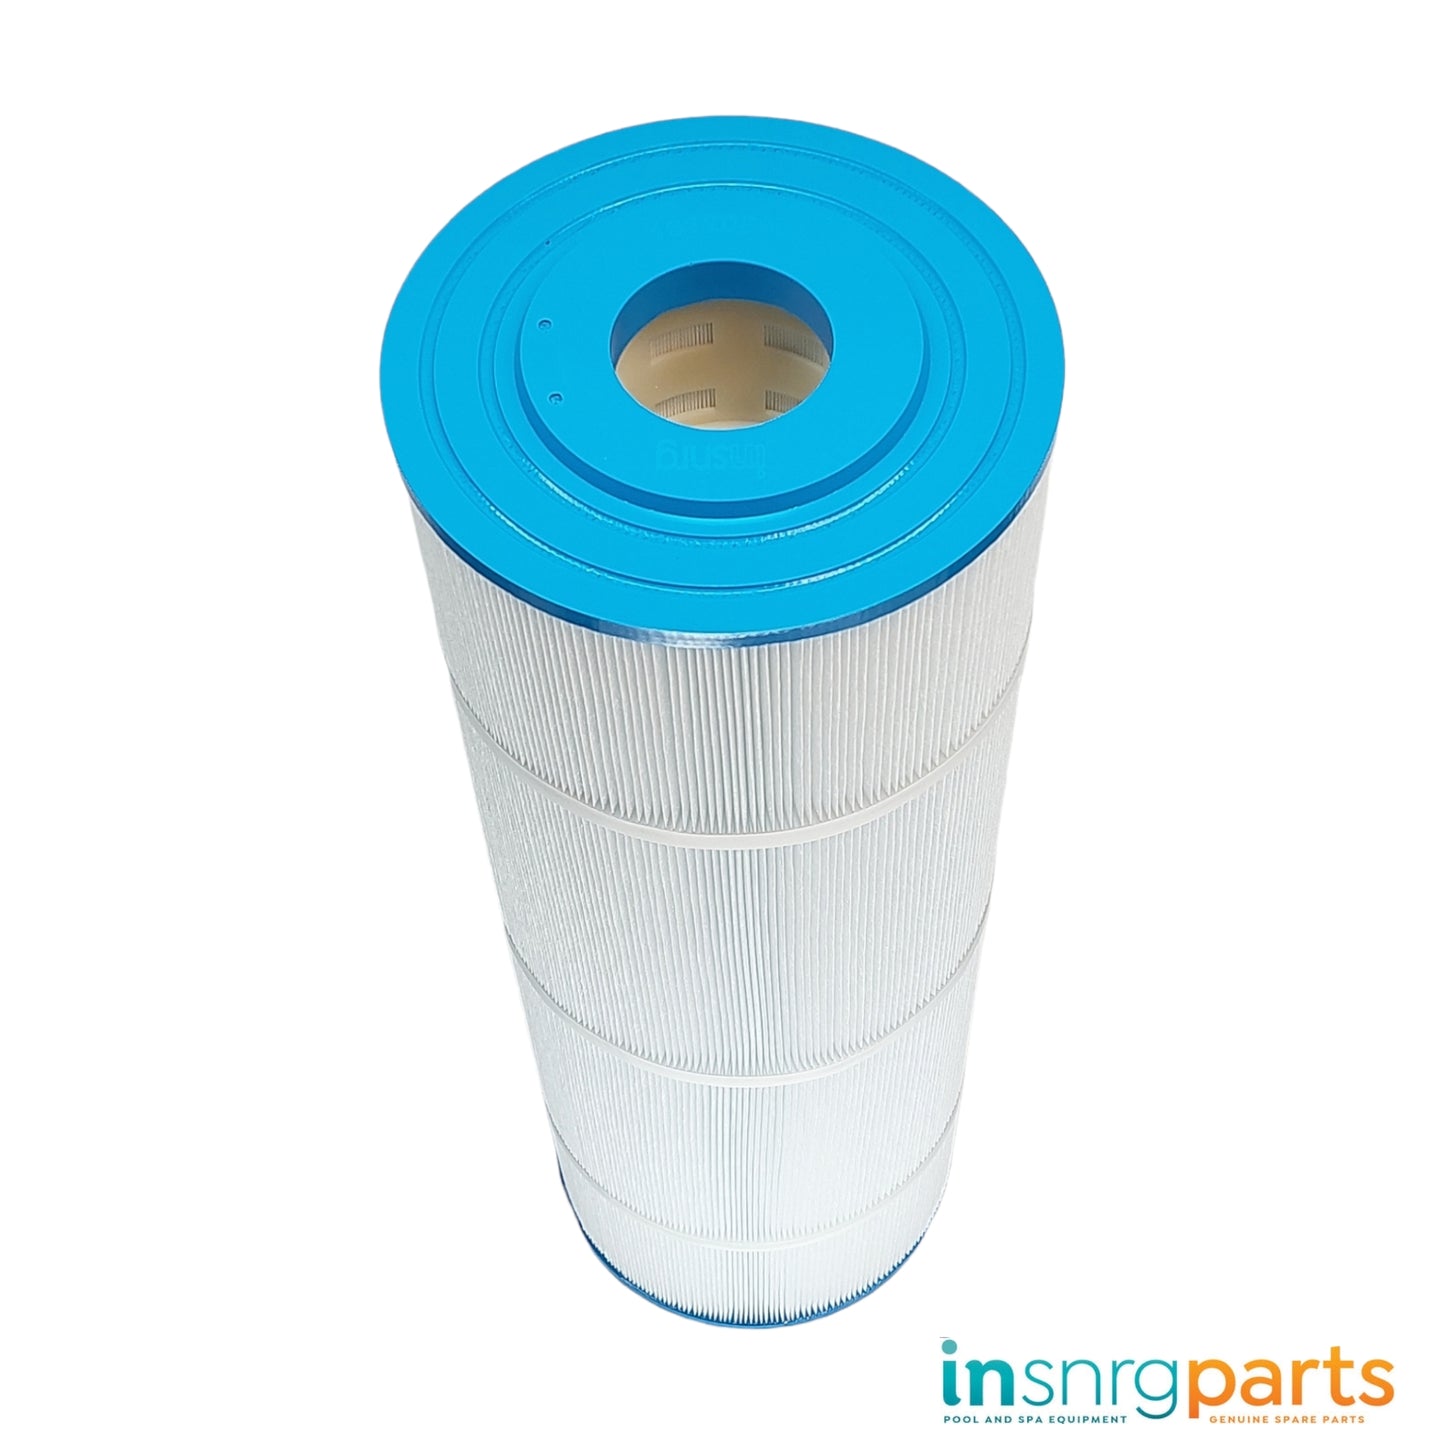 Replacement 200 Sq Ft Filter Cartridge/Element - Insnrg Ci200 Cartridge Filter [16120003]